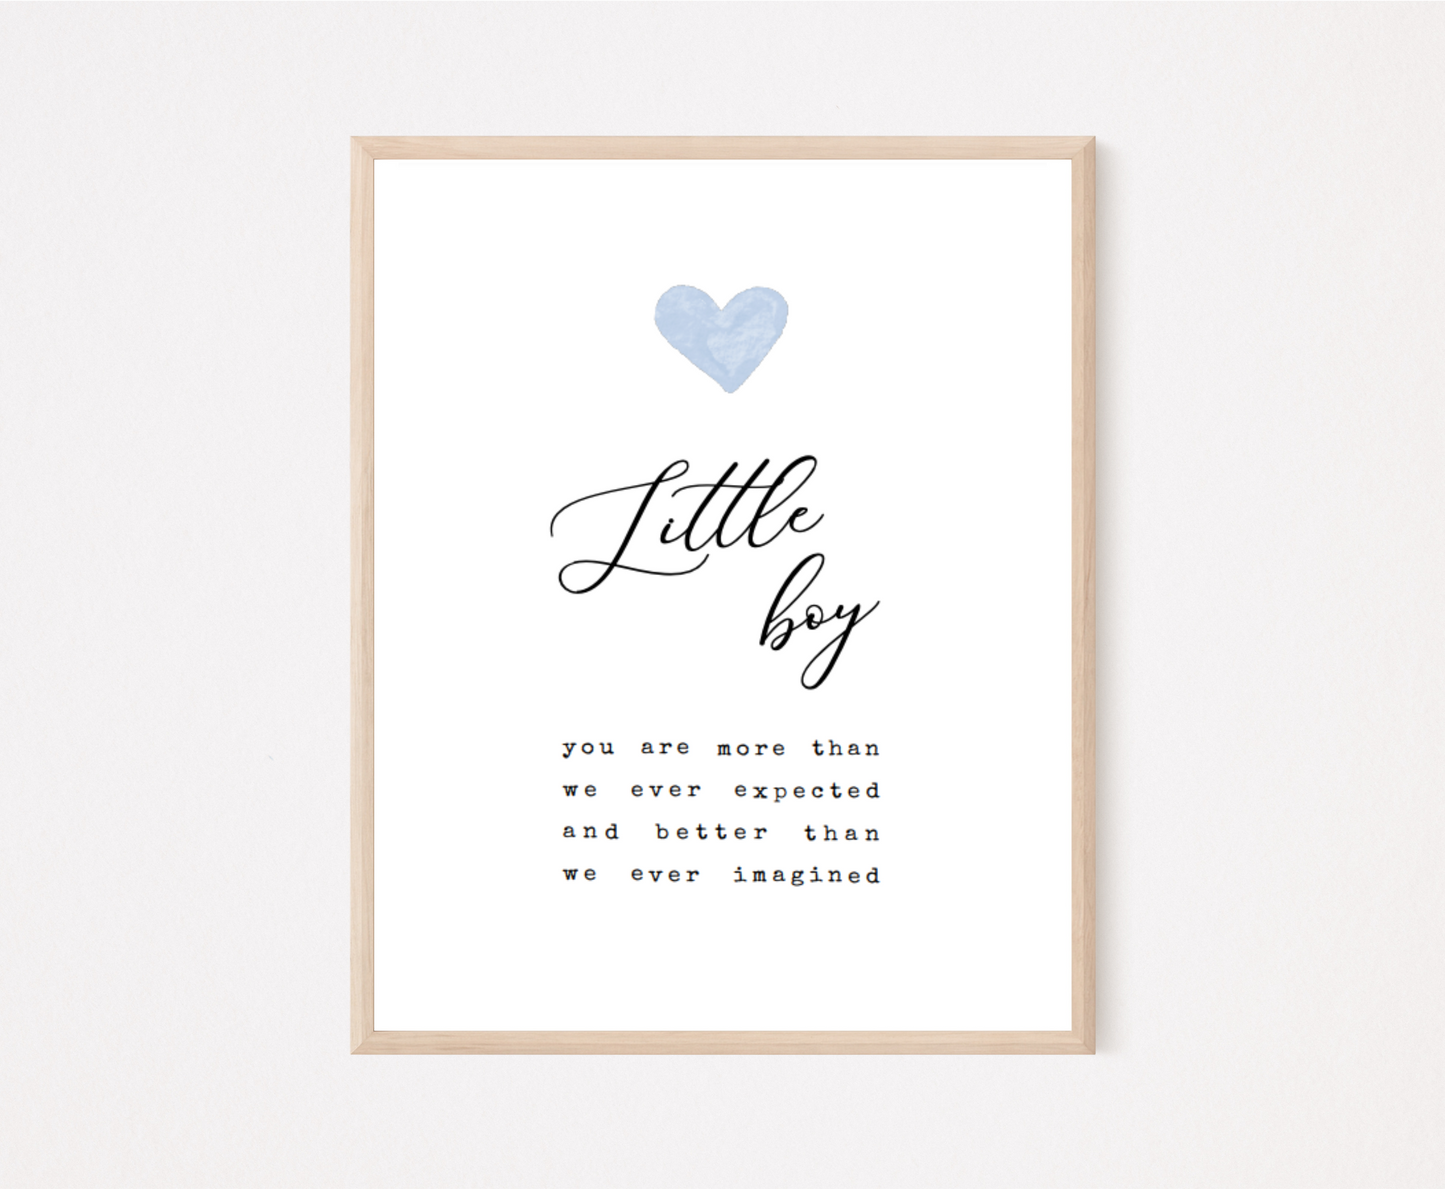 A frame displaying a baby blue heart with a piece of writing below that says: Little boy, you are more than we ever expected and better than we ever imagined.